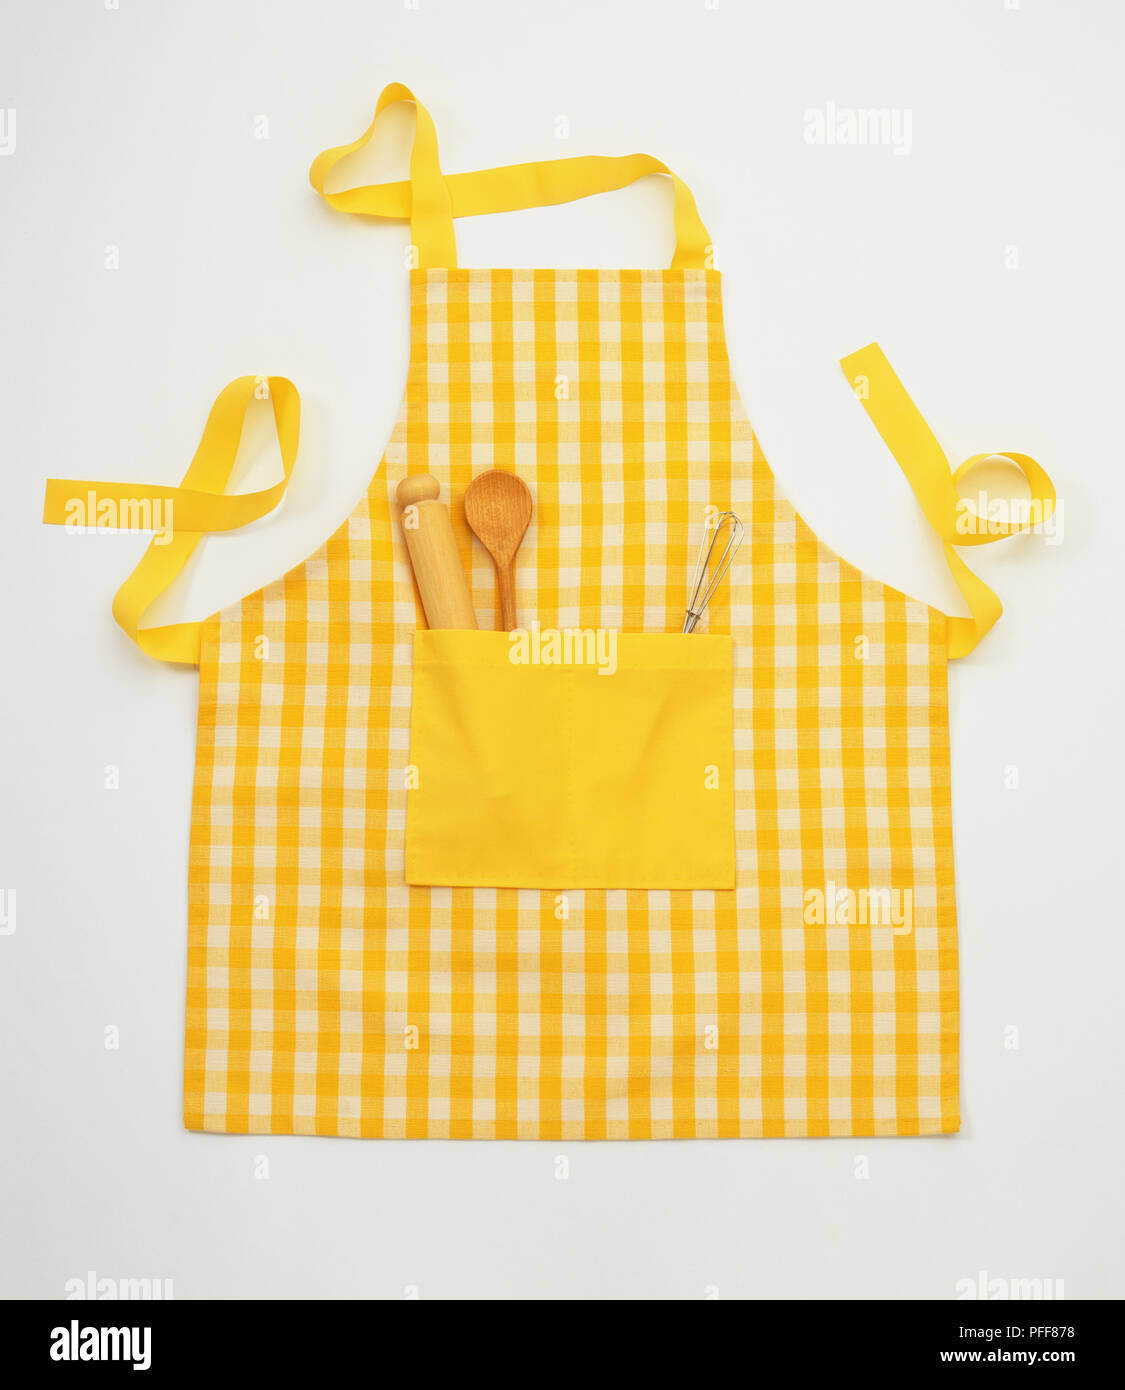 Chequered yellow apron with wooden spoon, rolling pin and whisk in the front pocket, front view. Stock Photo